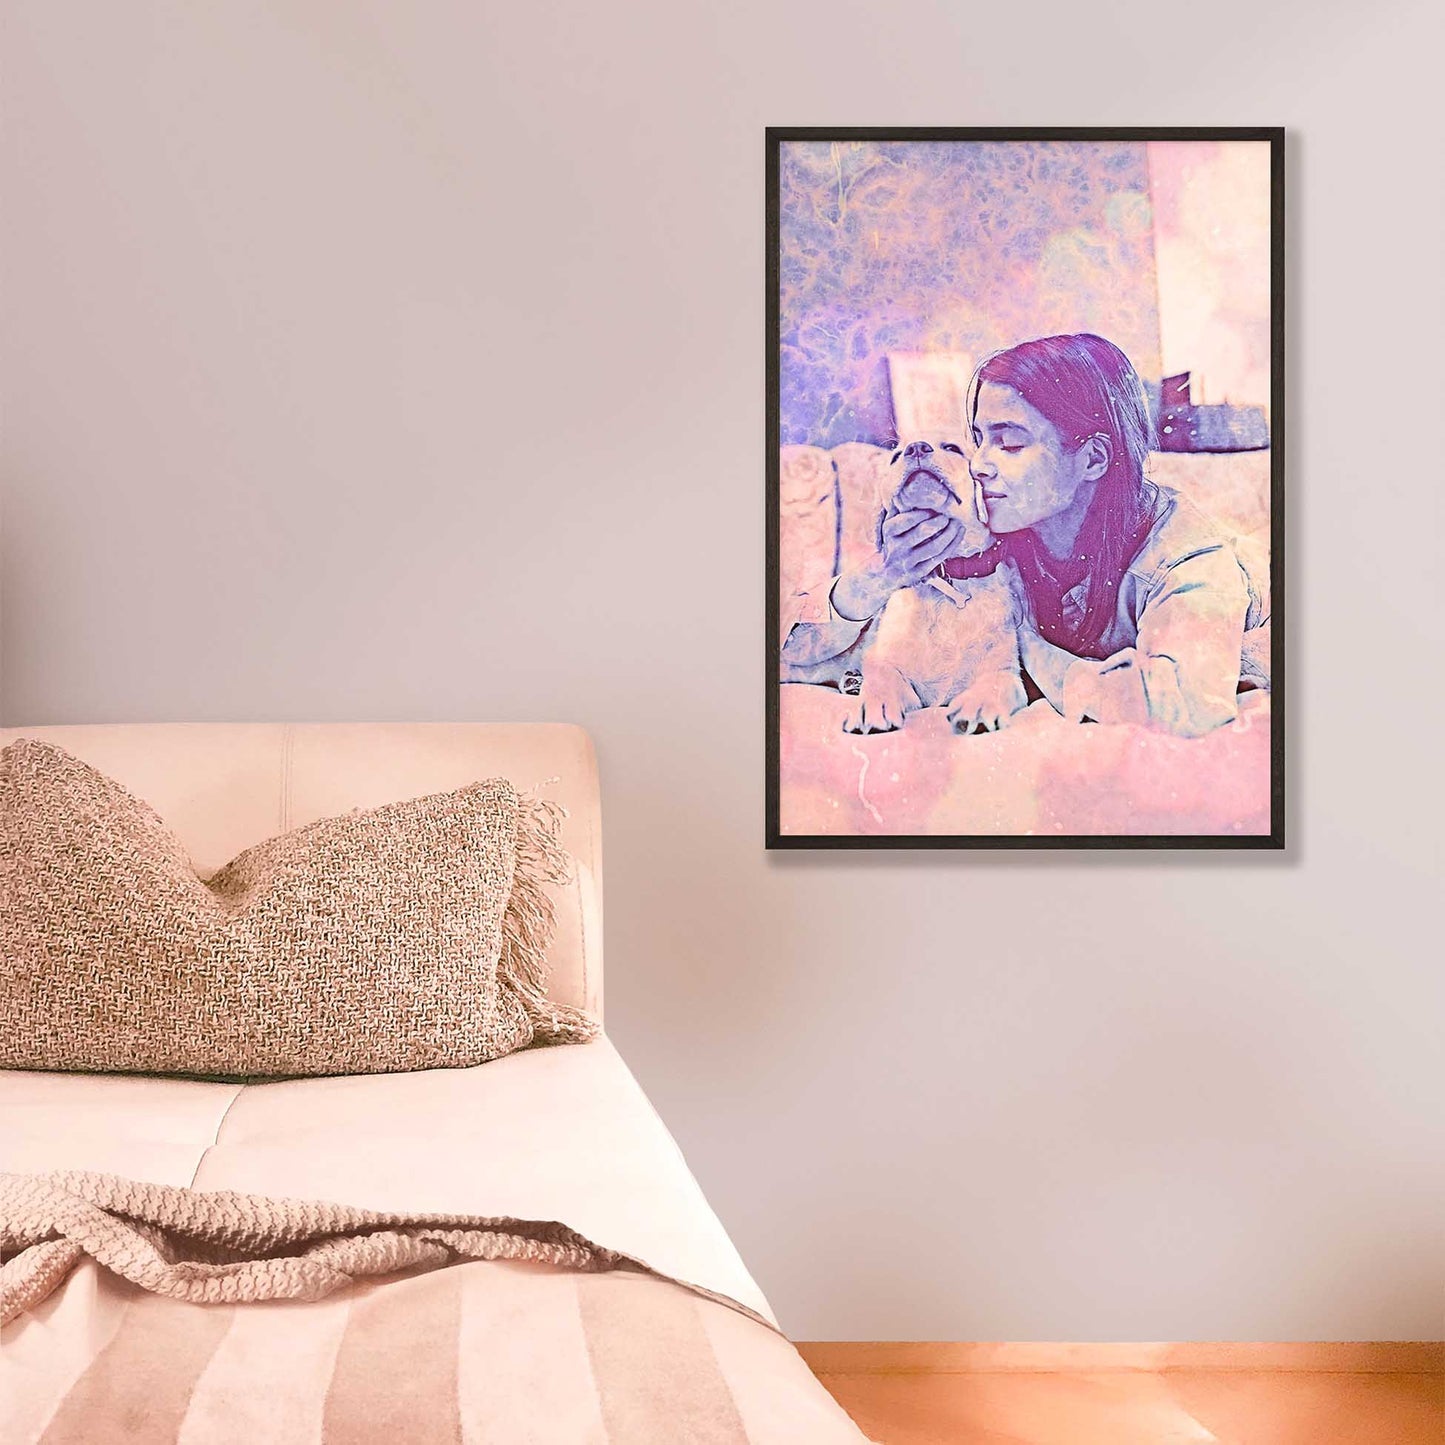 Add a touch of charm to your space with a Personalised Special Purple FX Framed Print. The bokeh effect and vibrant colors make it a stunning addition to your home decor. Crafted with care on gallery-quality paper and framed in wood